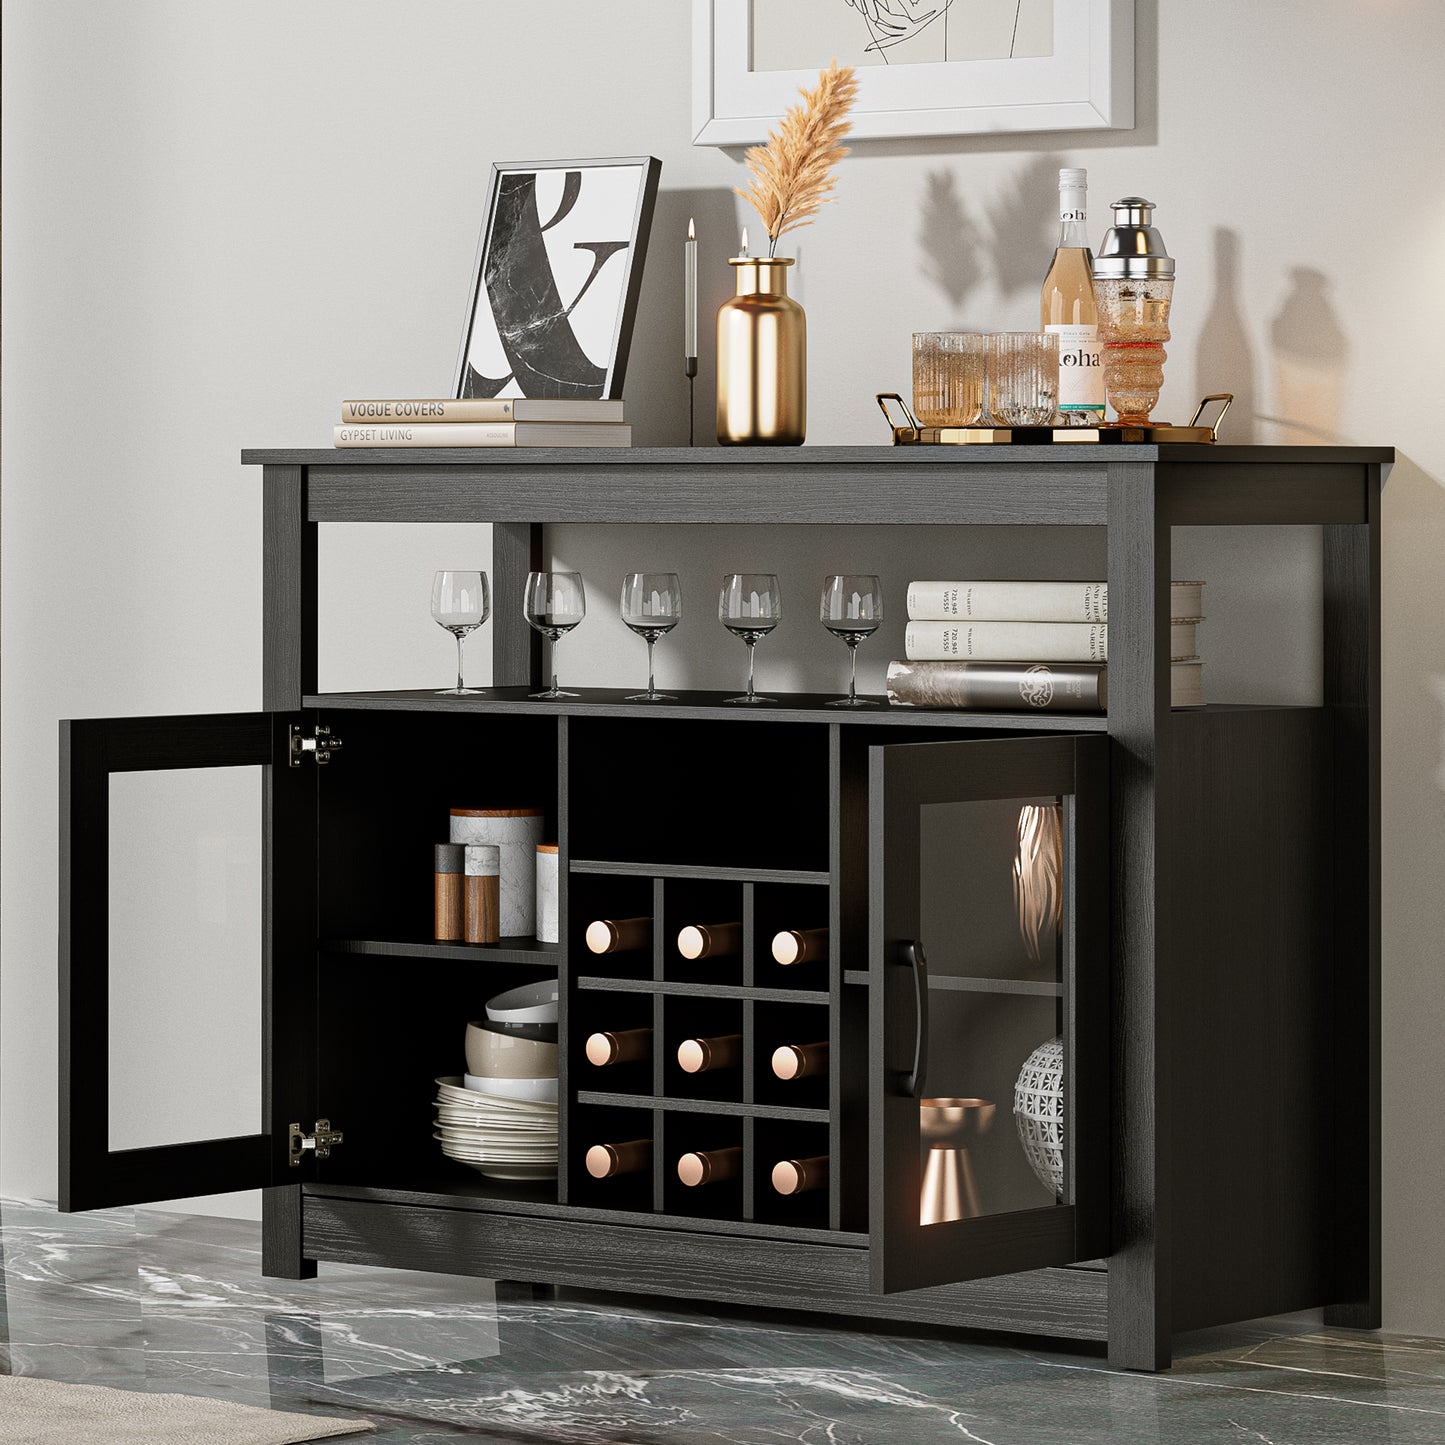 Buffet Sideboard, Freestanding Buffet Storage Cabinet, Wine Liquor Bar Buffet Cabinet with Removable Wine Rack for Kitchen, Living Room, Dining Room, Black